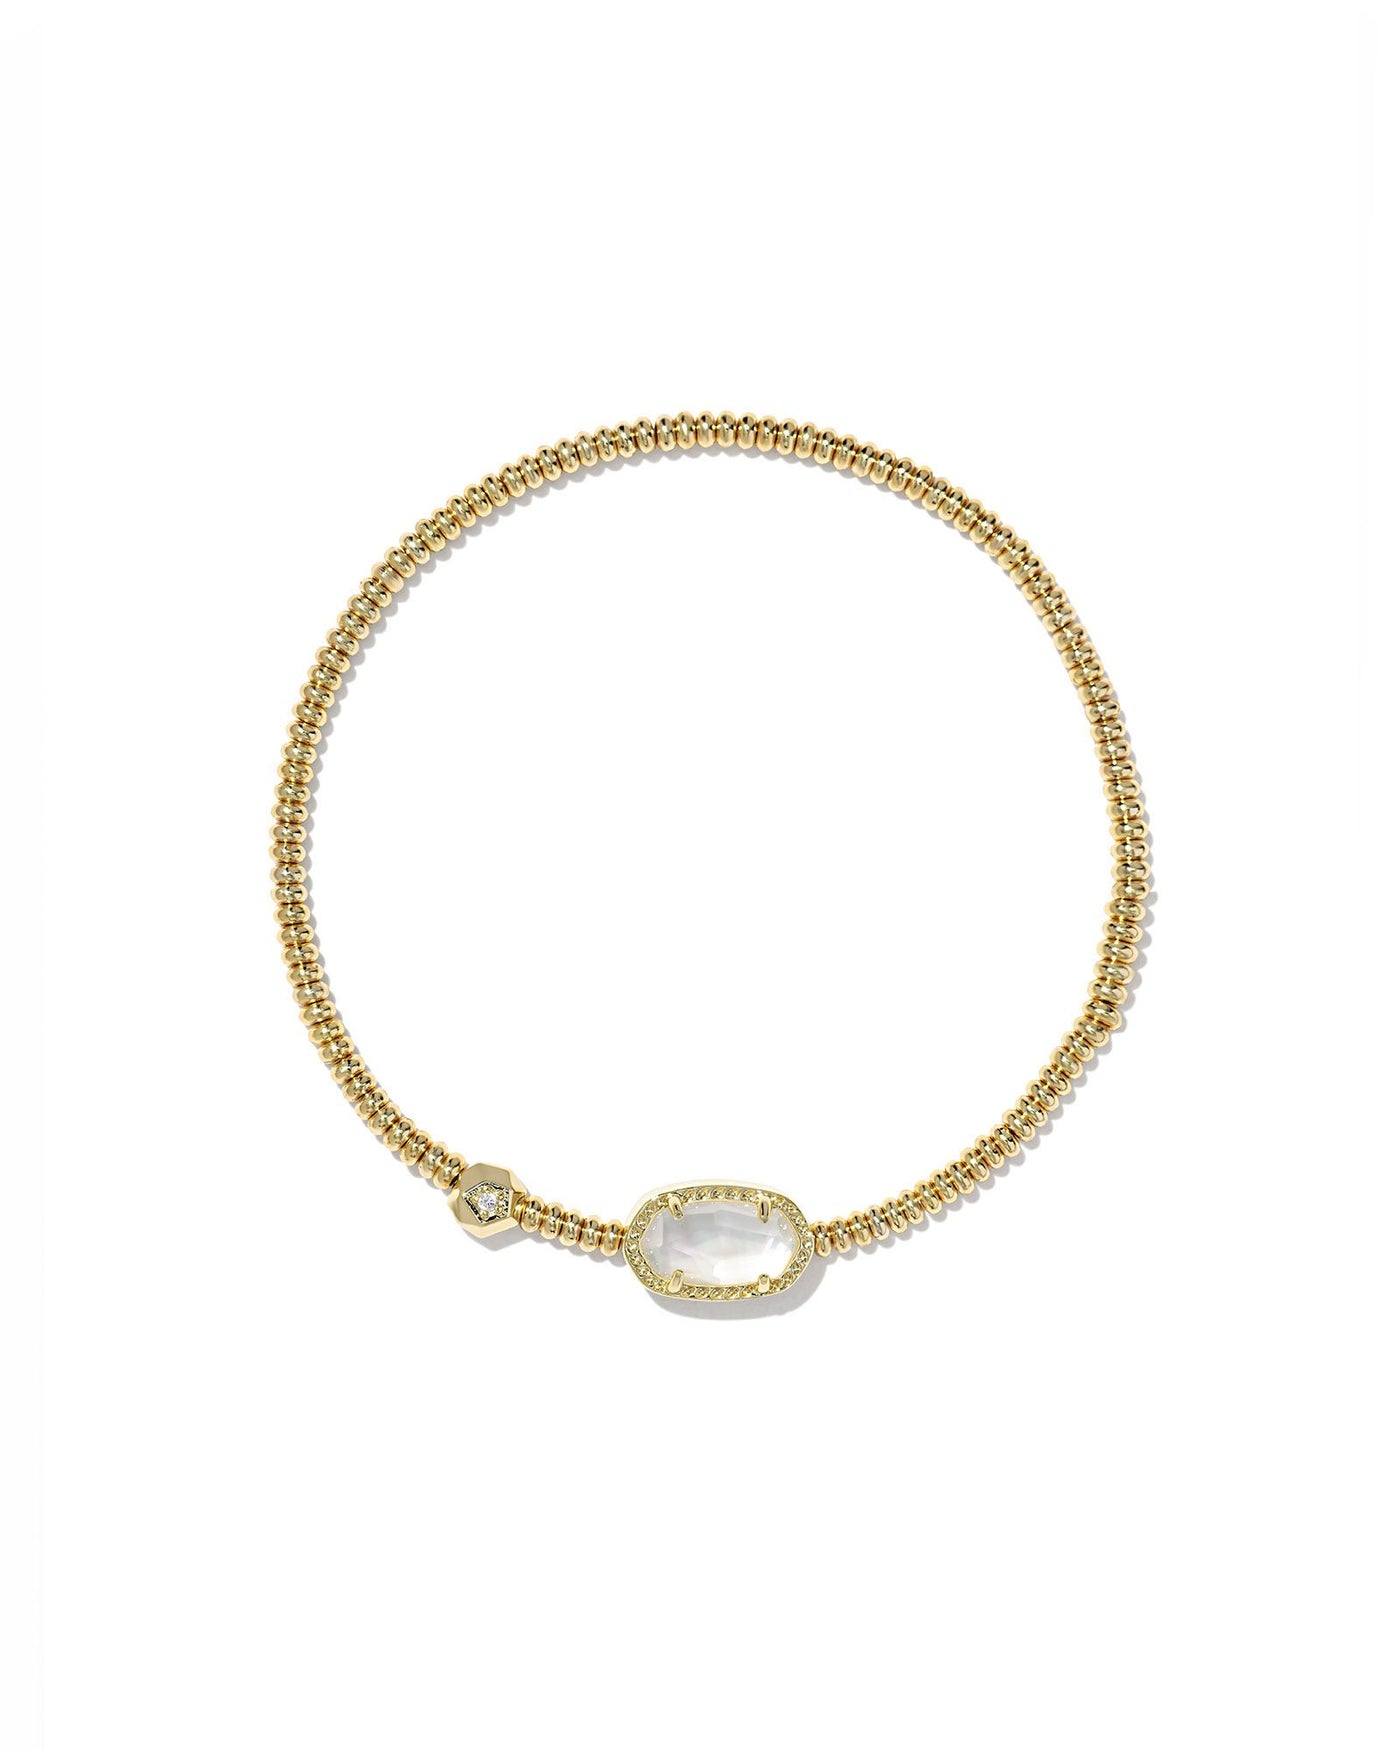 Kendra Scott Grayson Stretch Bracelet in Gold Mother of Pearl on white background closeup.